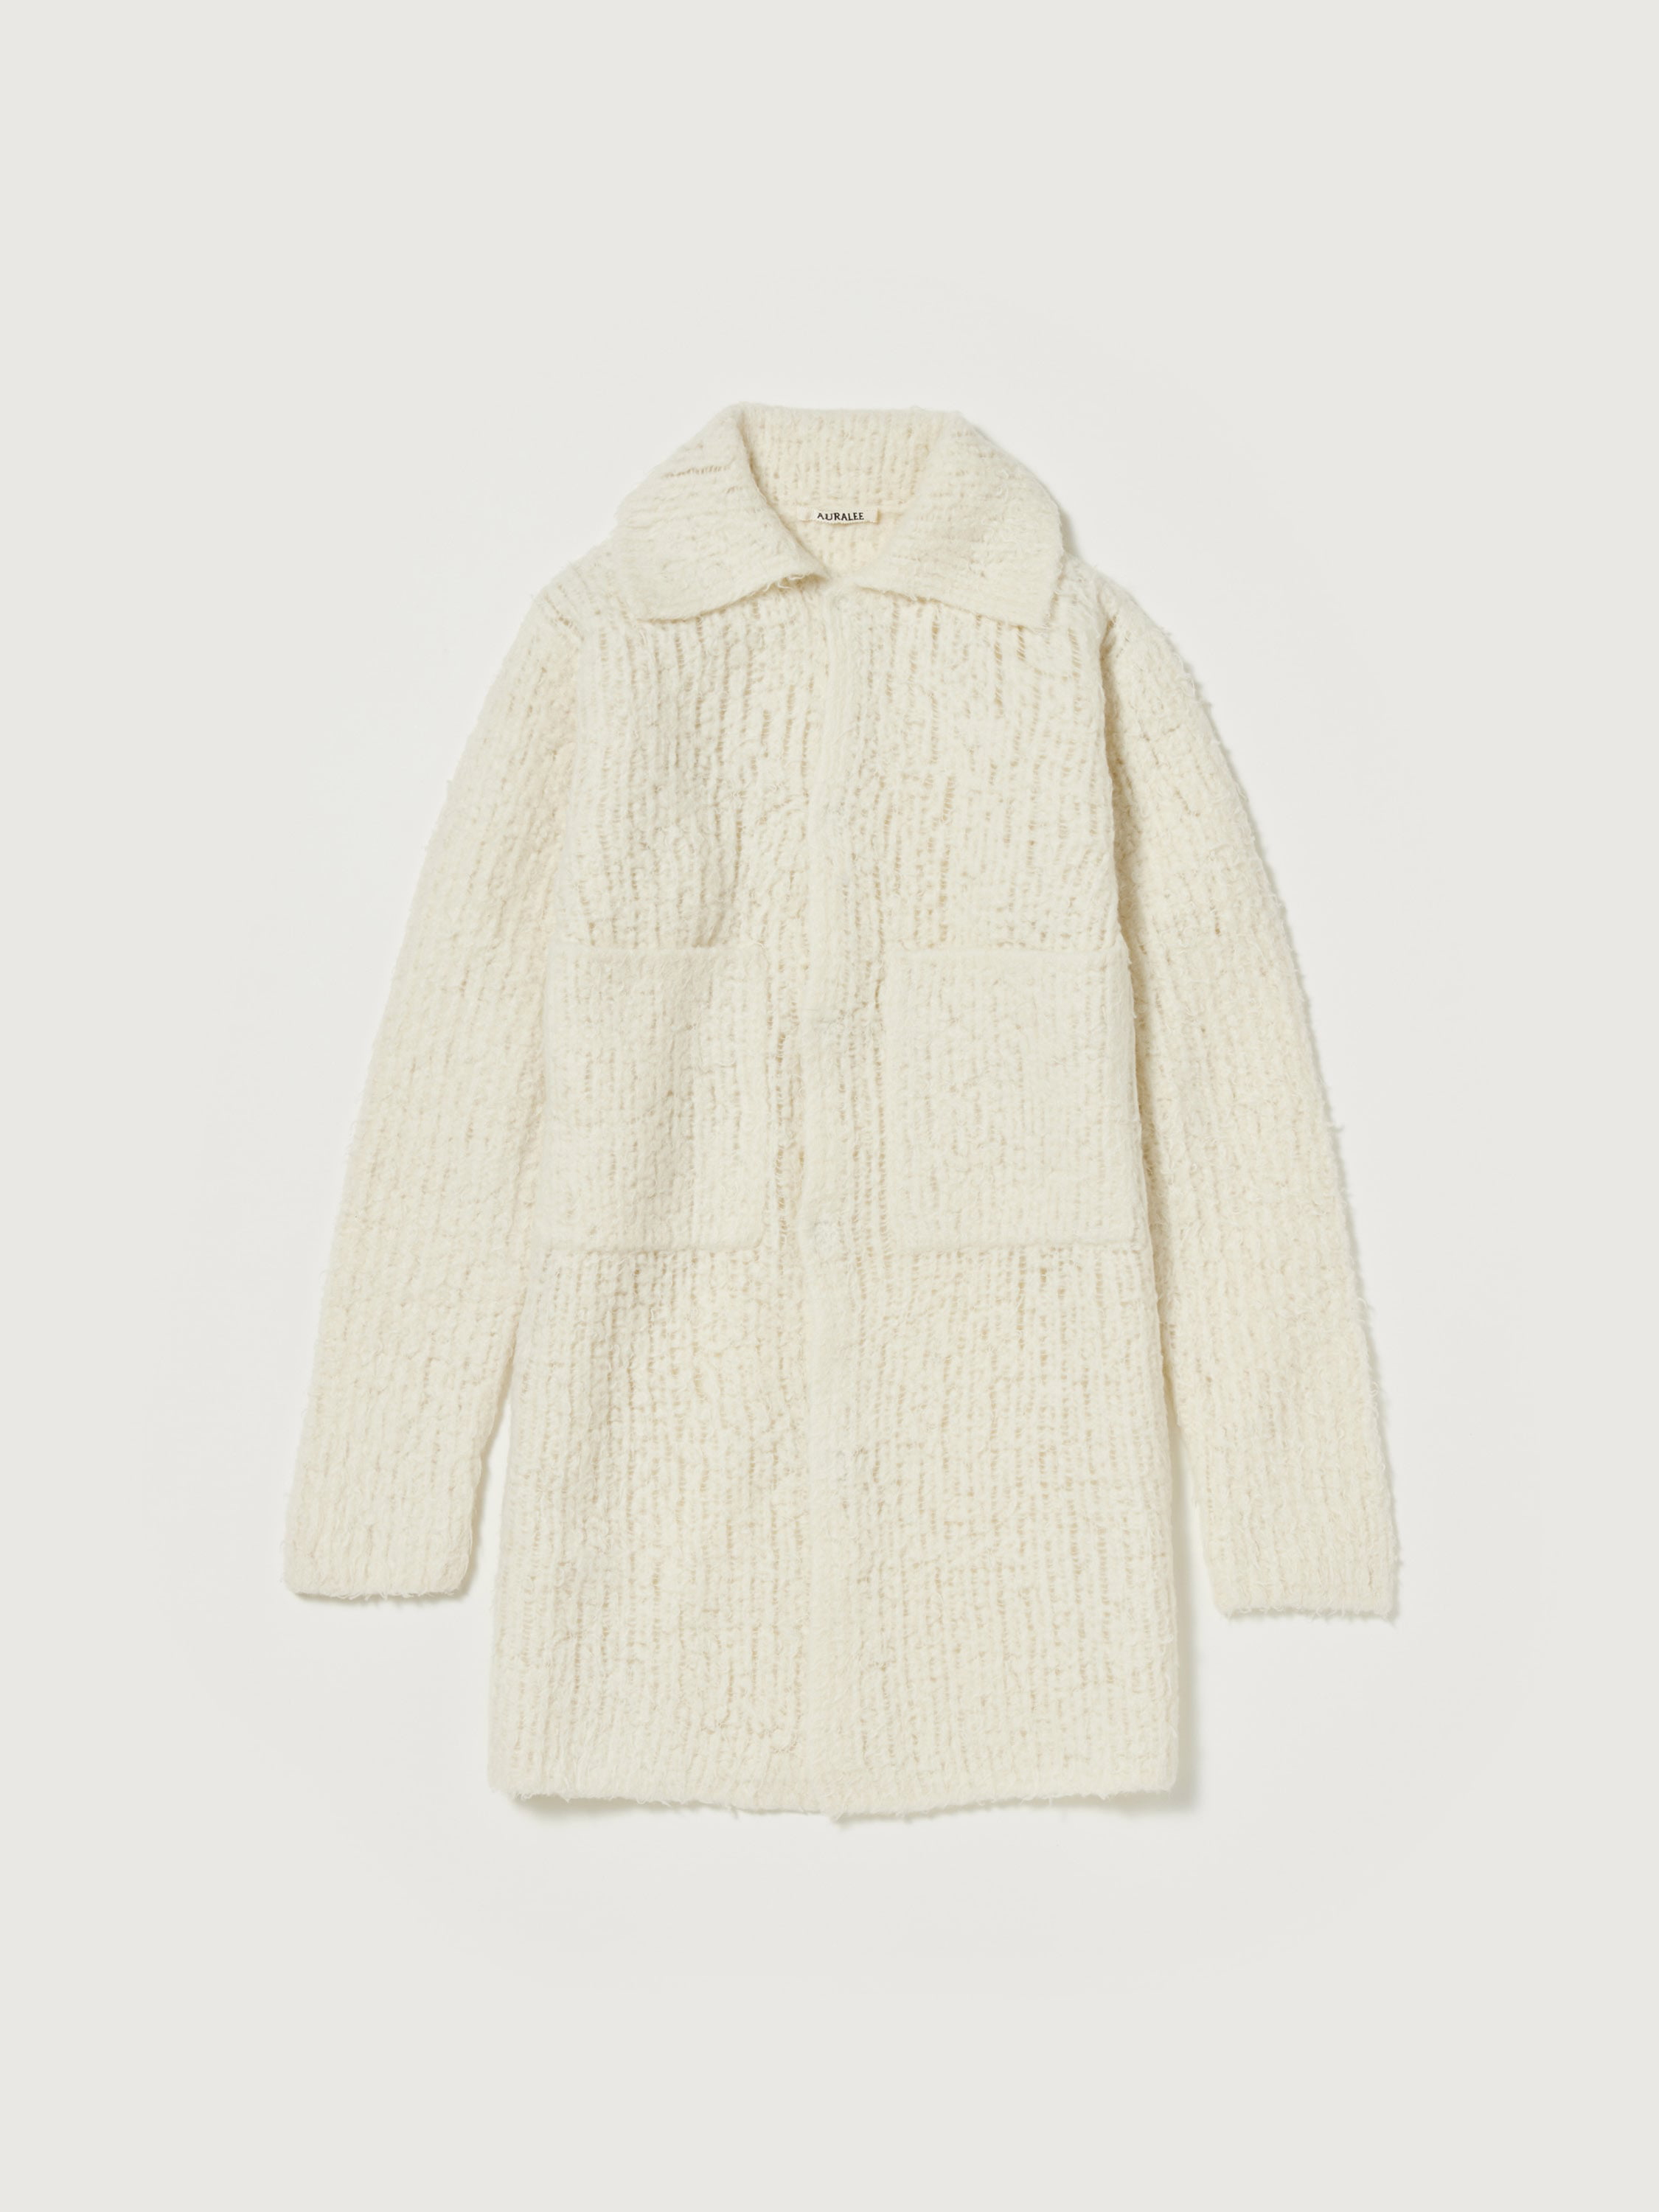 MILLED WOOL MOAL KNIT LONG CARDIGAN 詳細画像 WHITE 1